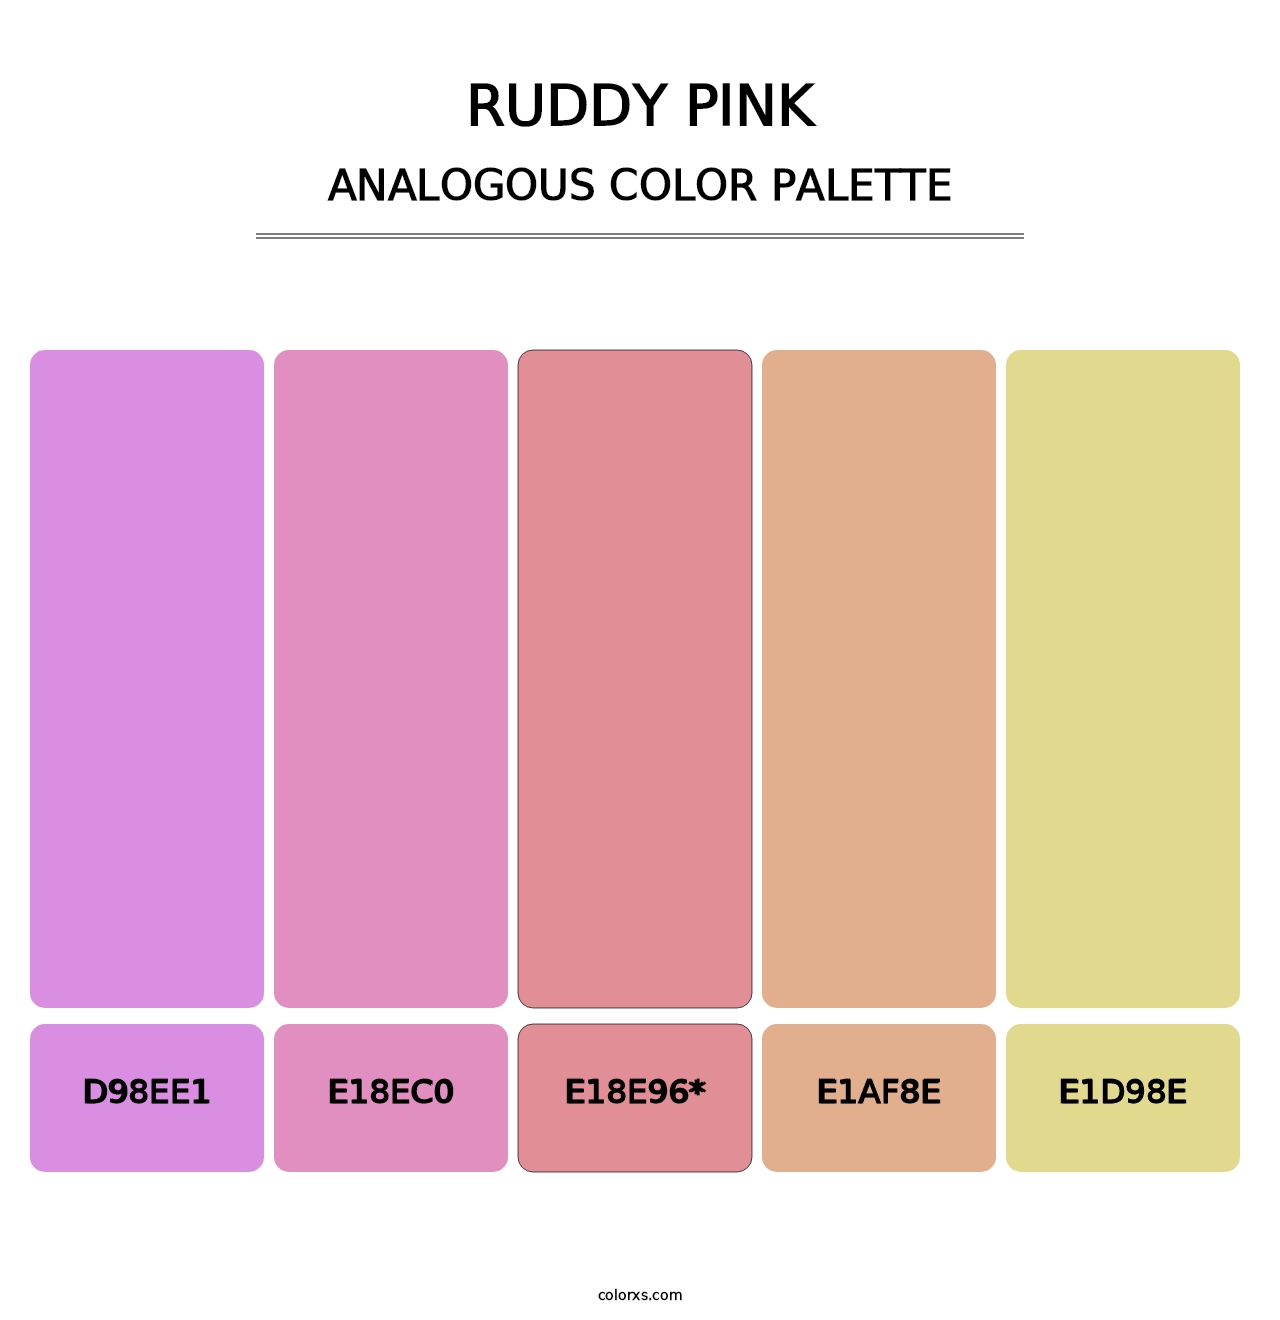 Ruddy Pink - Analogous Color Palette